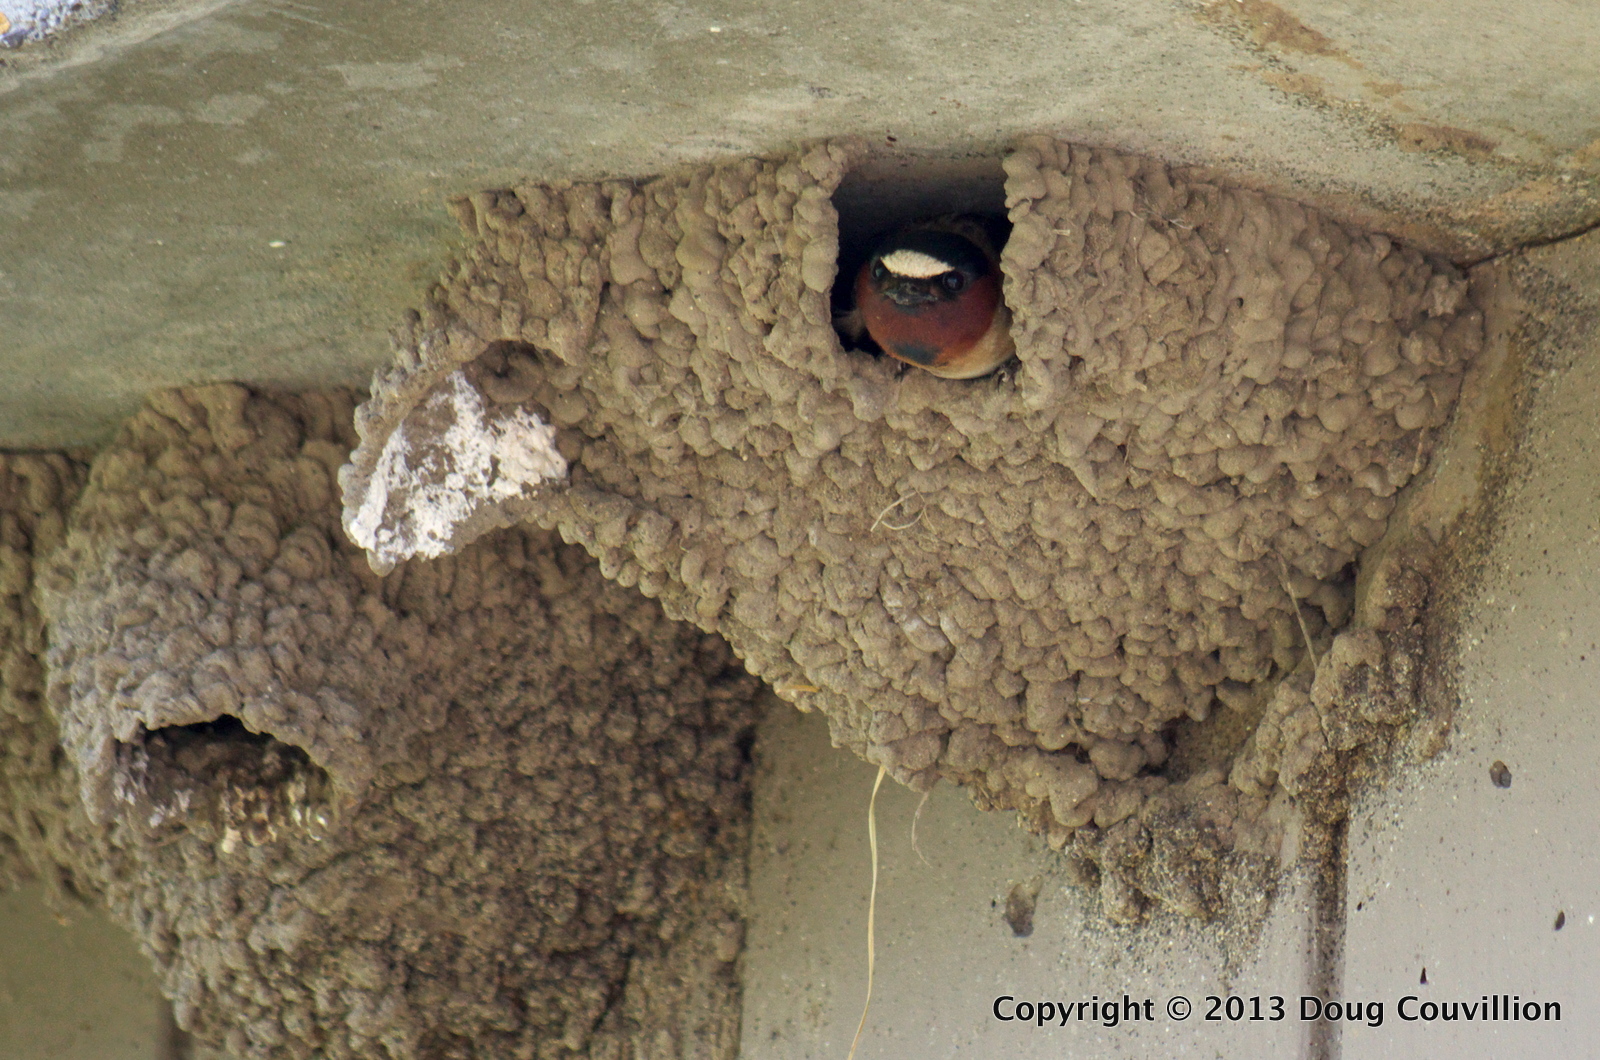 photograph of Cliff Swallow nests under the eaves of a building in Yellowstone National Park